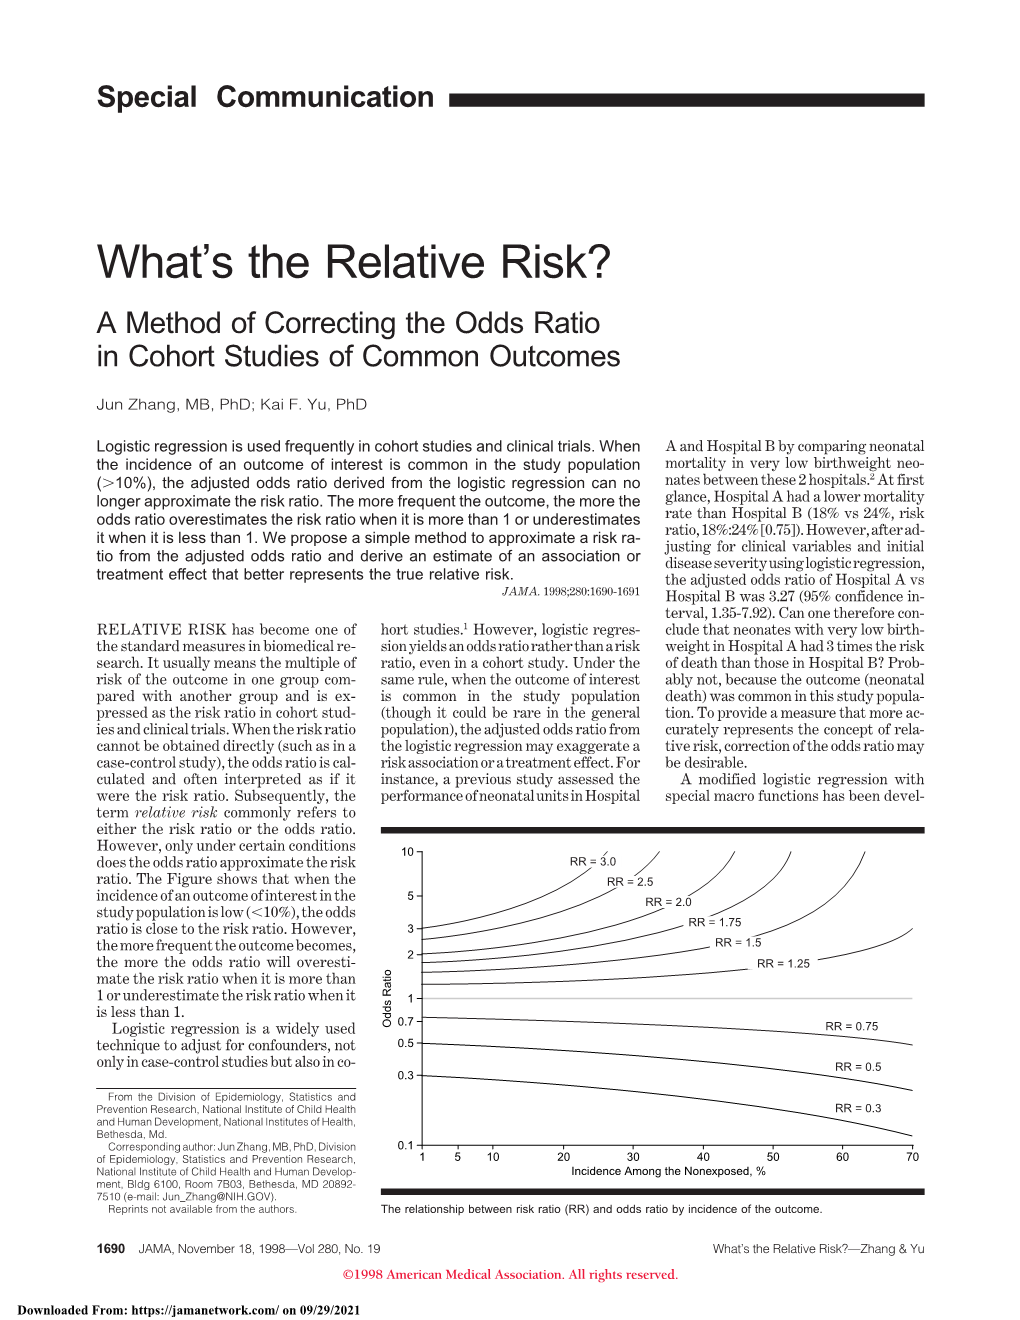 What's the Relative Risk?